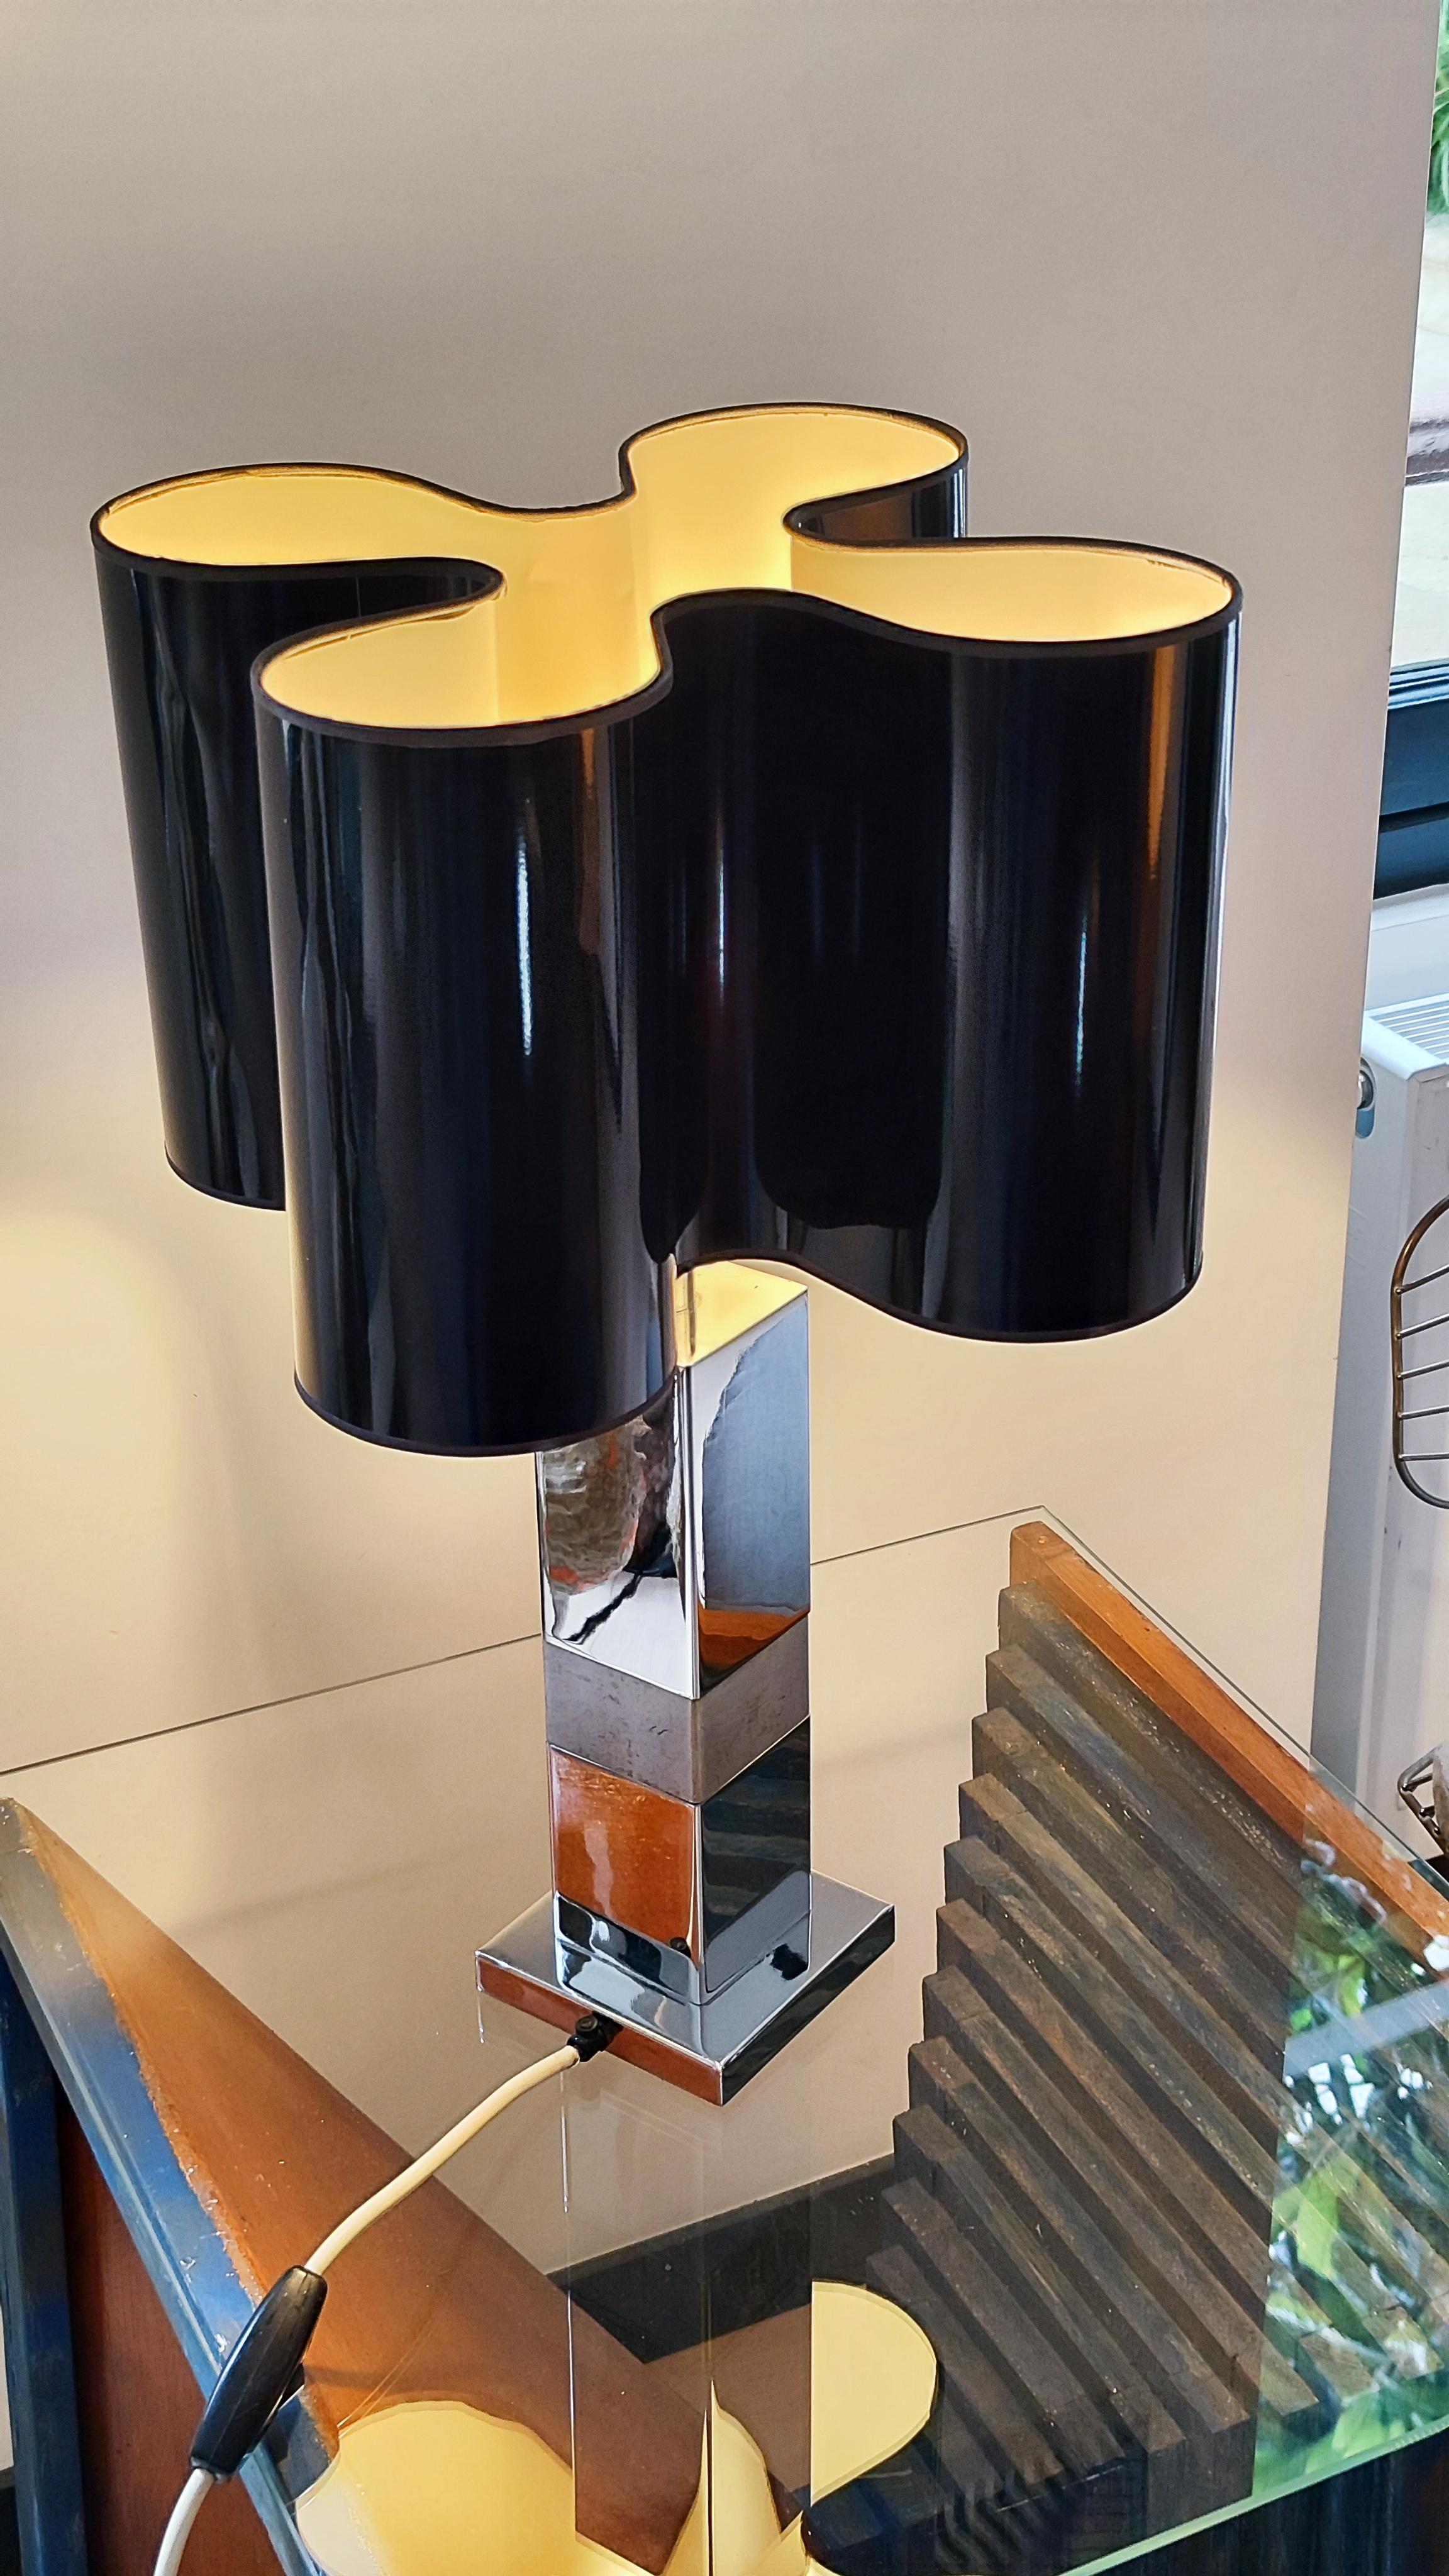 Late 20th Century 70s table lamp - France - metal foot and lampshade black plastic thermoformed